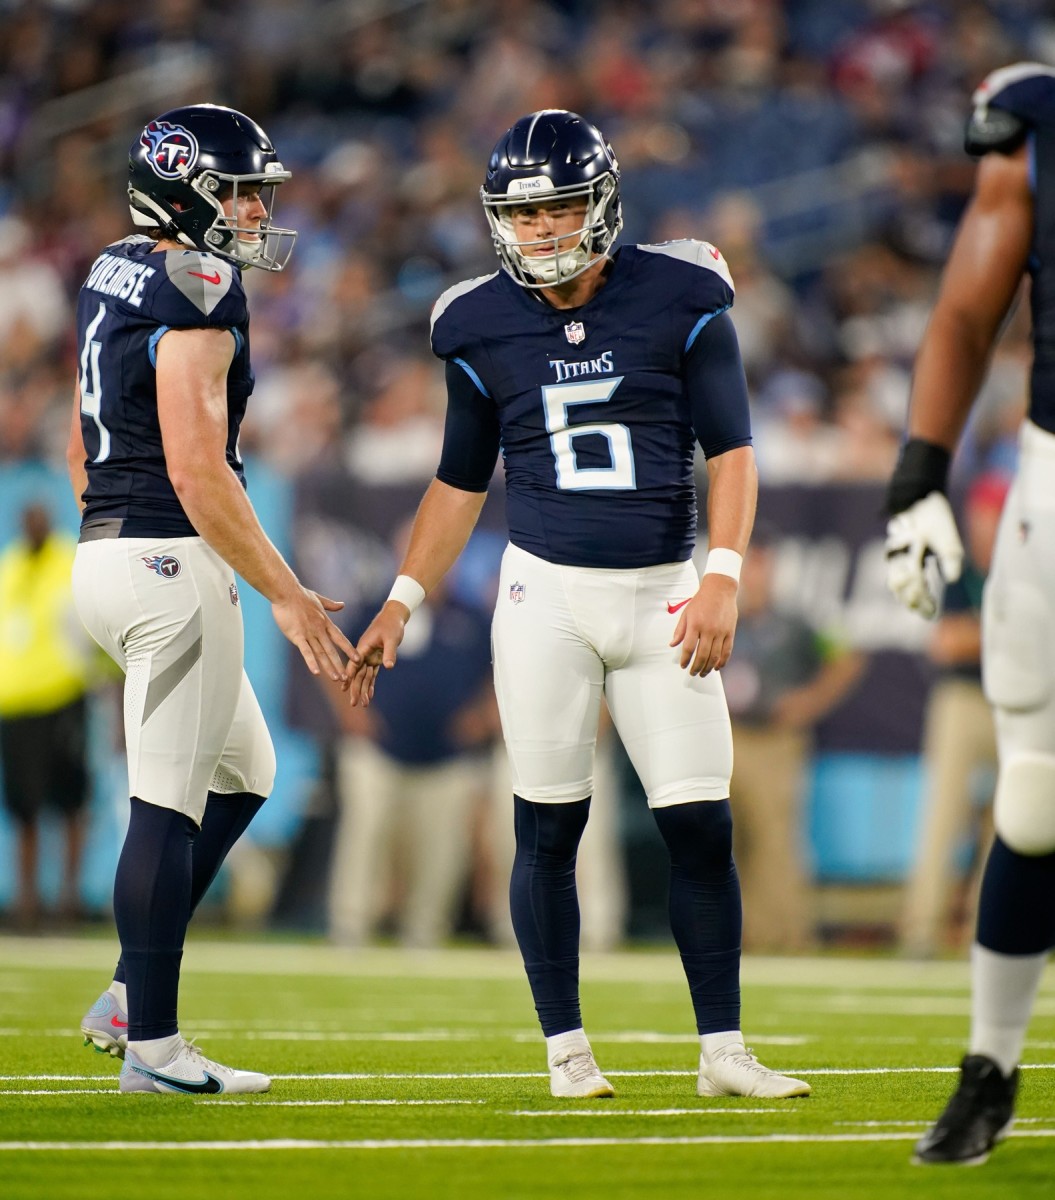 Tennessee Titans place kicker Michael Badgley (6) kicks a field goal against the New England Patriots.